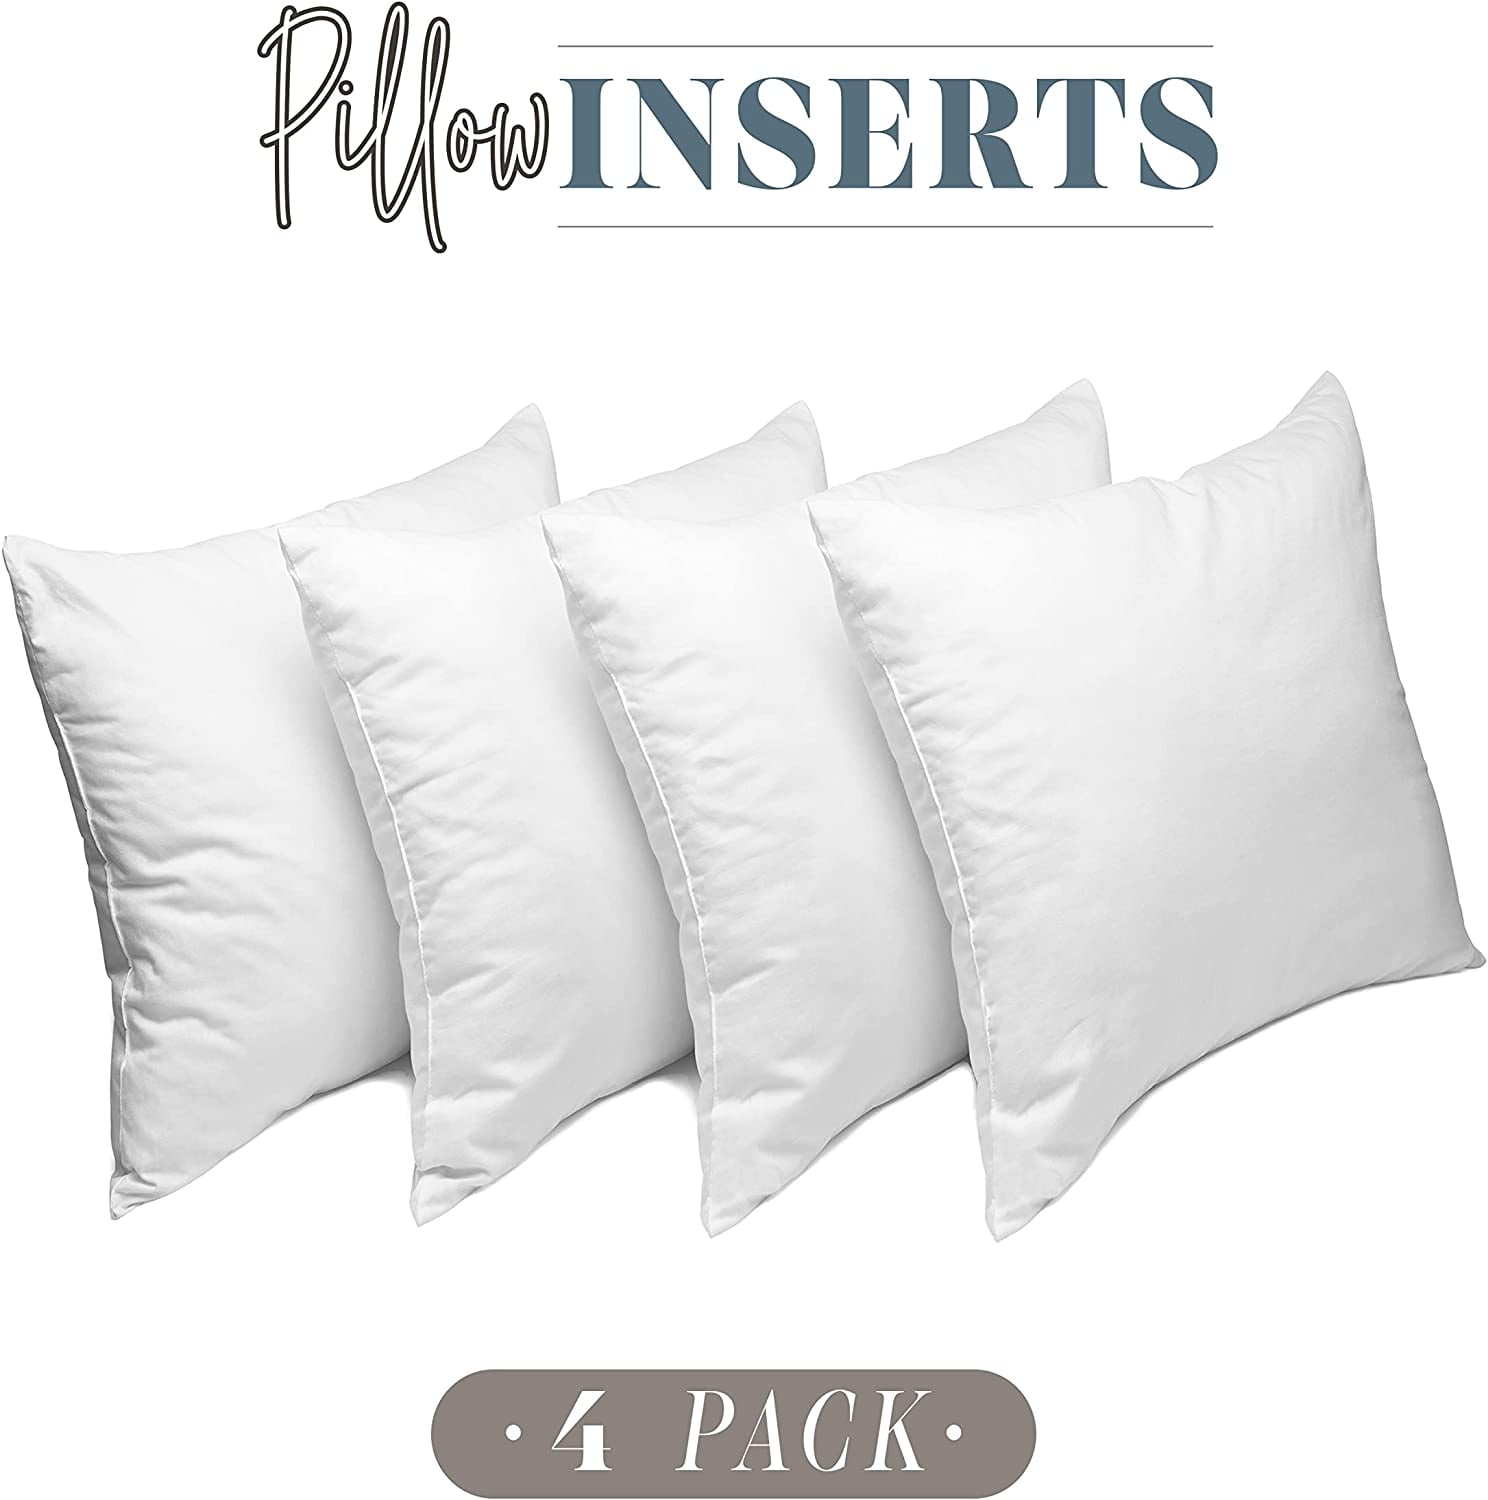 Outdoor Throw Pillow 16 in. x 16 in. Inserts Set of 4 Water Resistant Inserts Hypoallergenic Pillow Insert, White